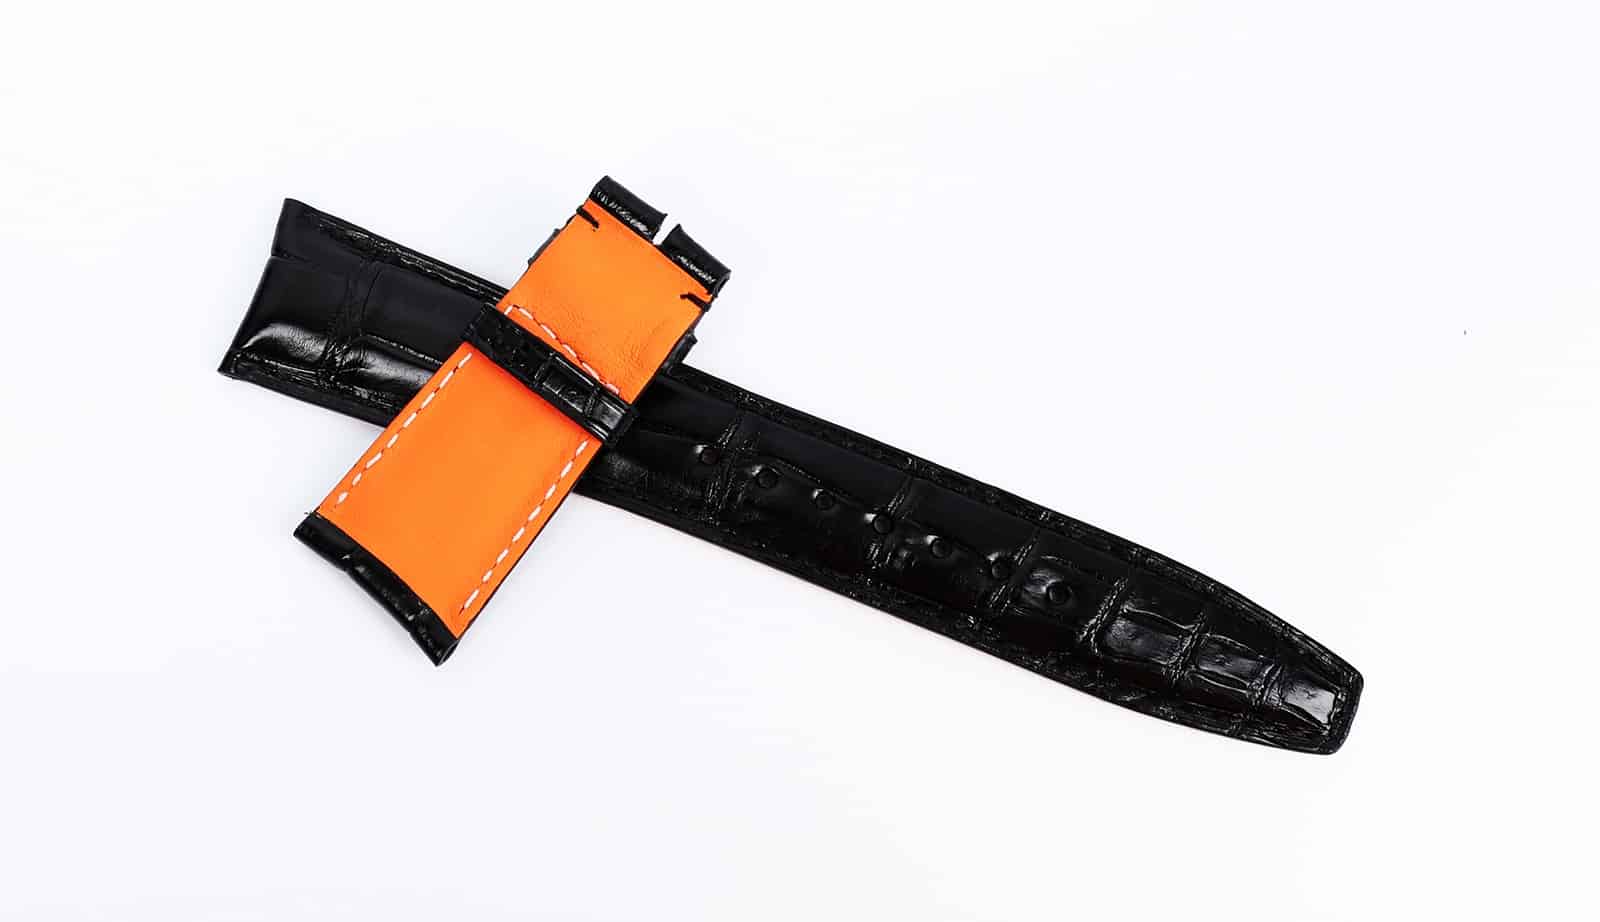 High-end quality belly-scale IWC santoni leather strap